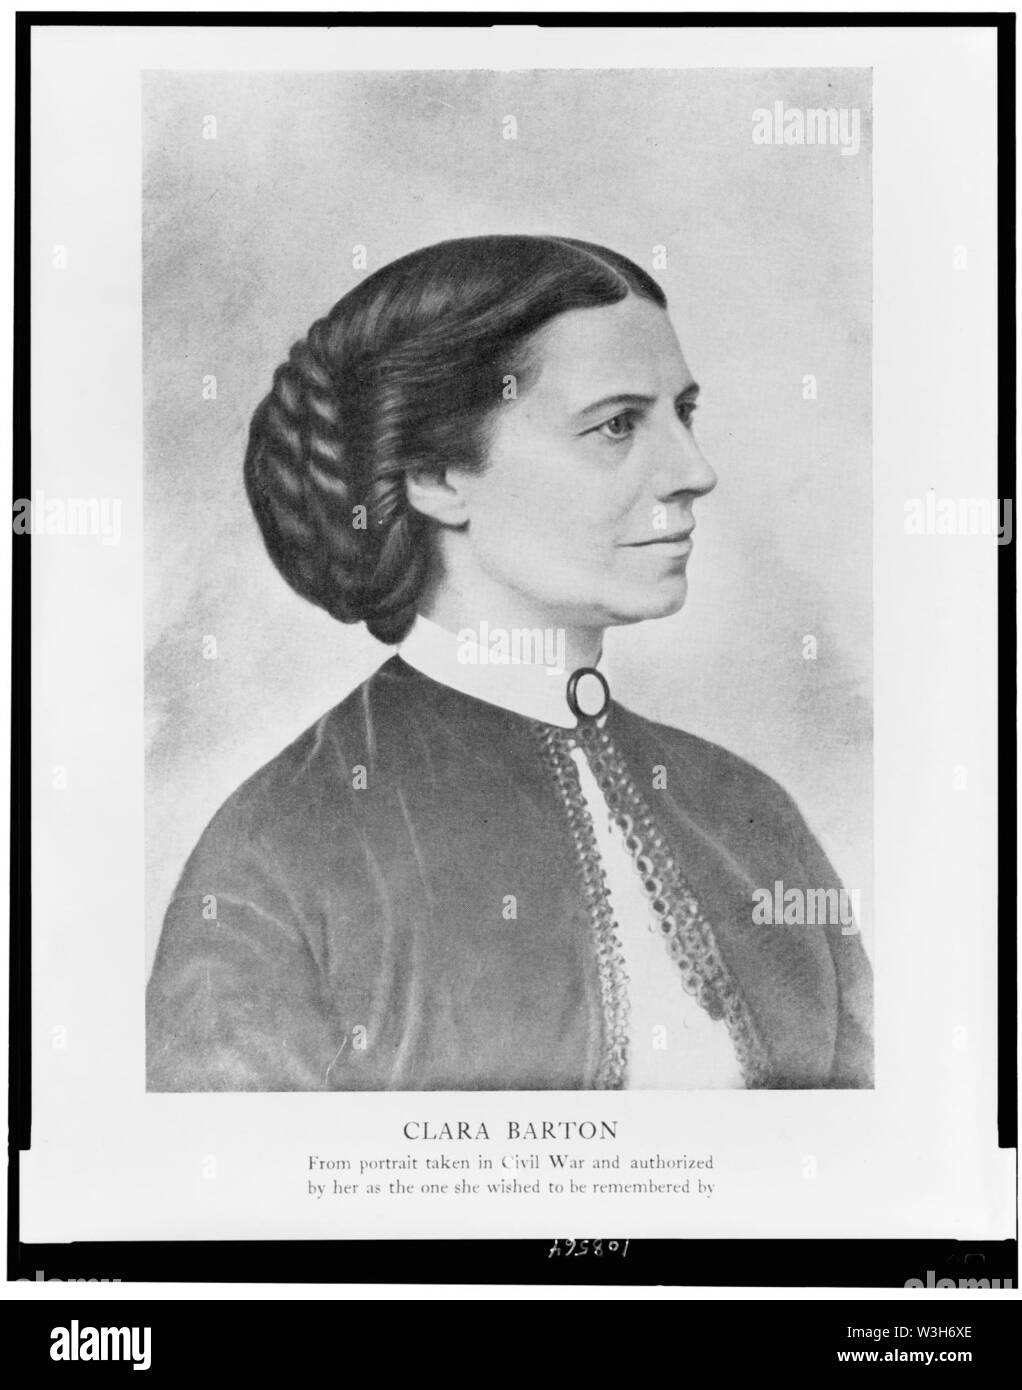 Clara Barton - from portrait taken in Civil War and authorized by her as the one she wished to be remembered by Stock Photo